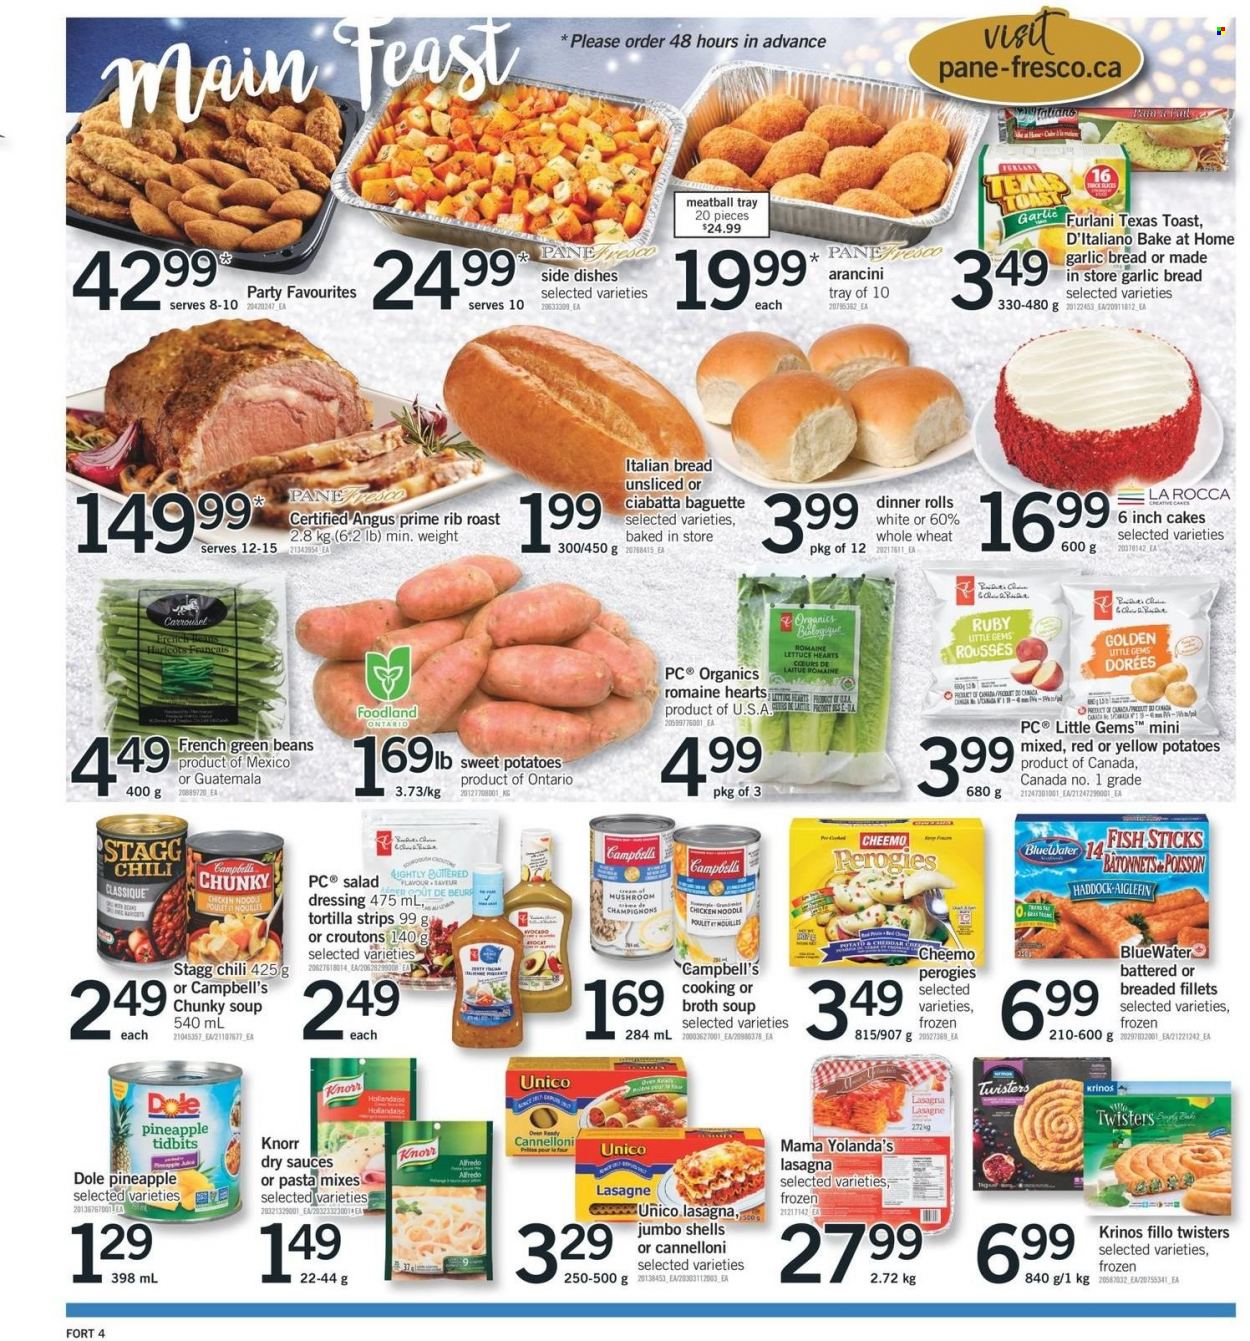 thumbnail - Fortinos Flyer - December 30, 2021 - January 05, 2022 - Sales products - bread, tortillas, cake, dinner rolls, green beans, sweet potato, potatoes, lettuce, Dole, pineapple, haddock, Campbell's, soup, noodles, lasagna meal, croutons, broth, dressing, tray, pot, oven, Knorr, baguette, ciabatta. Page 5.